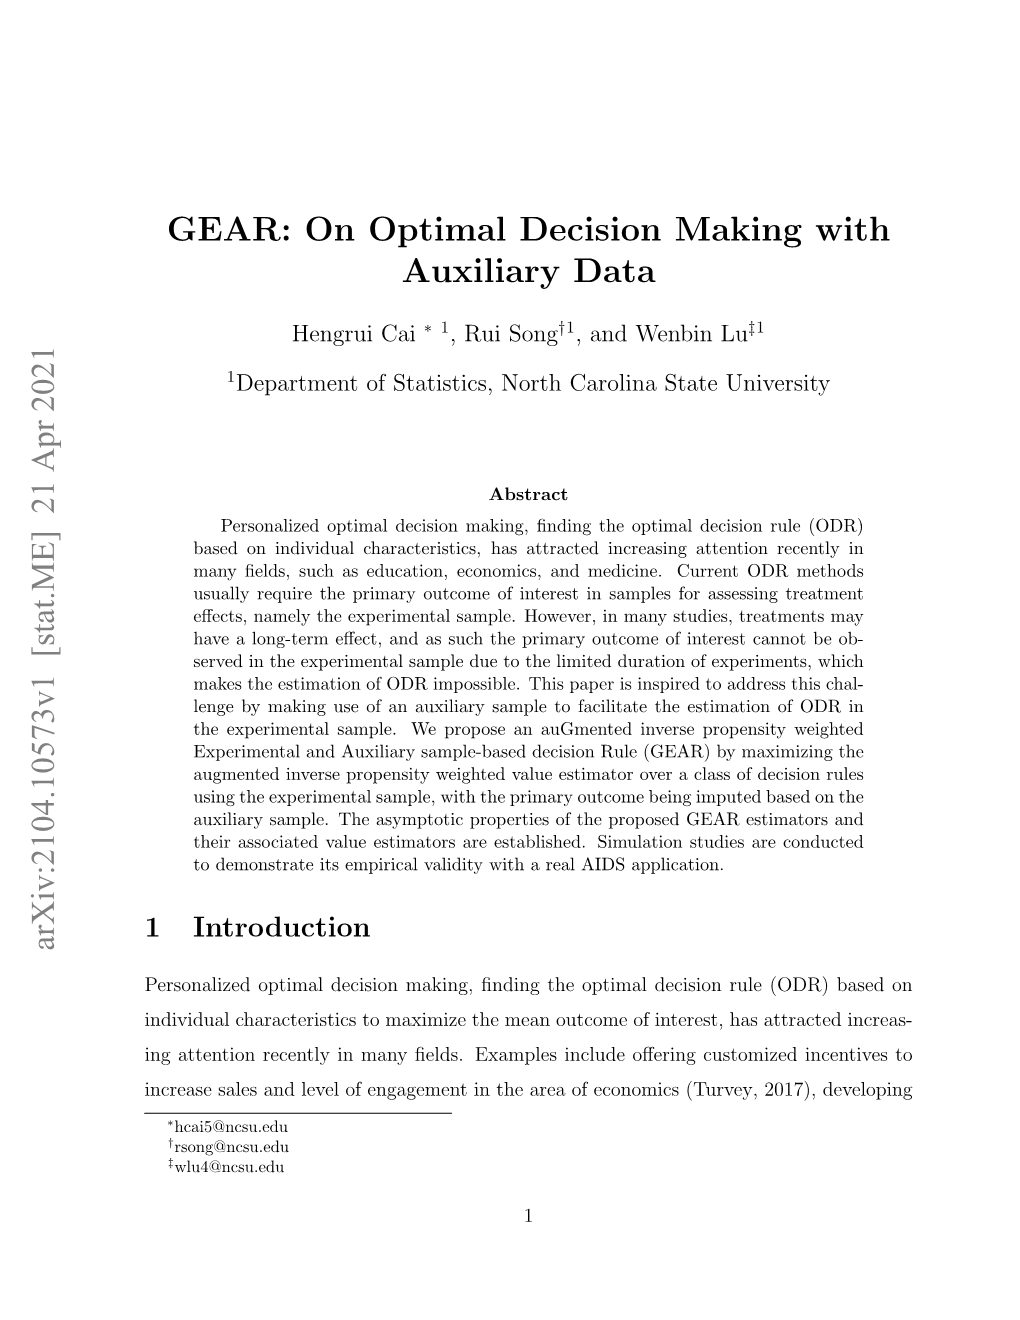 On Optimal Decision Making with Auxiliary Data